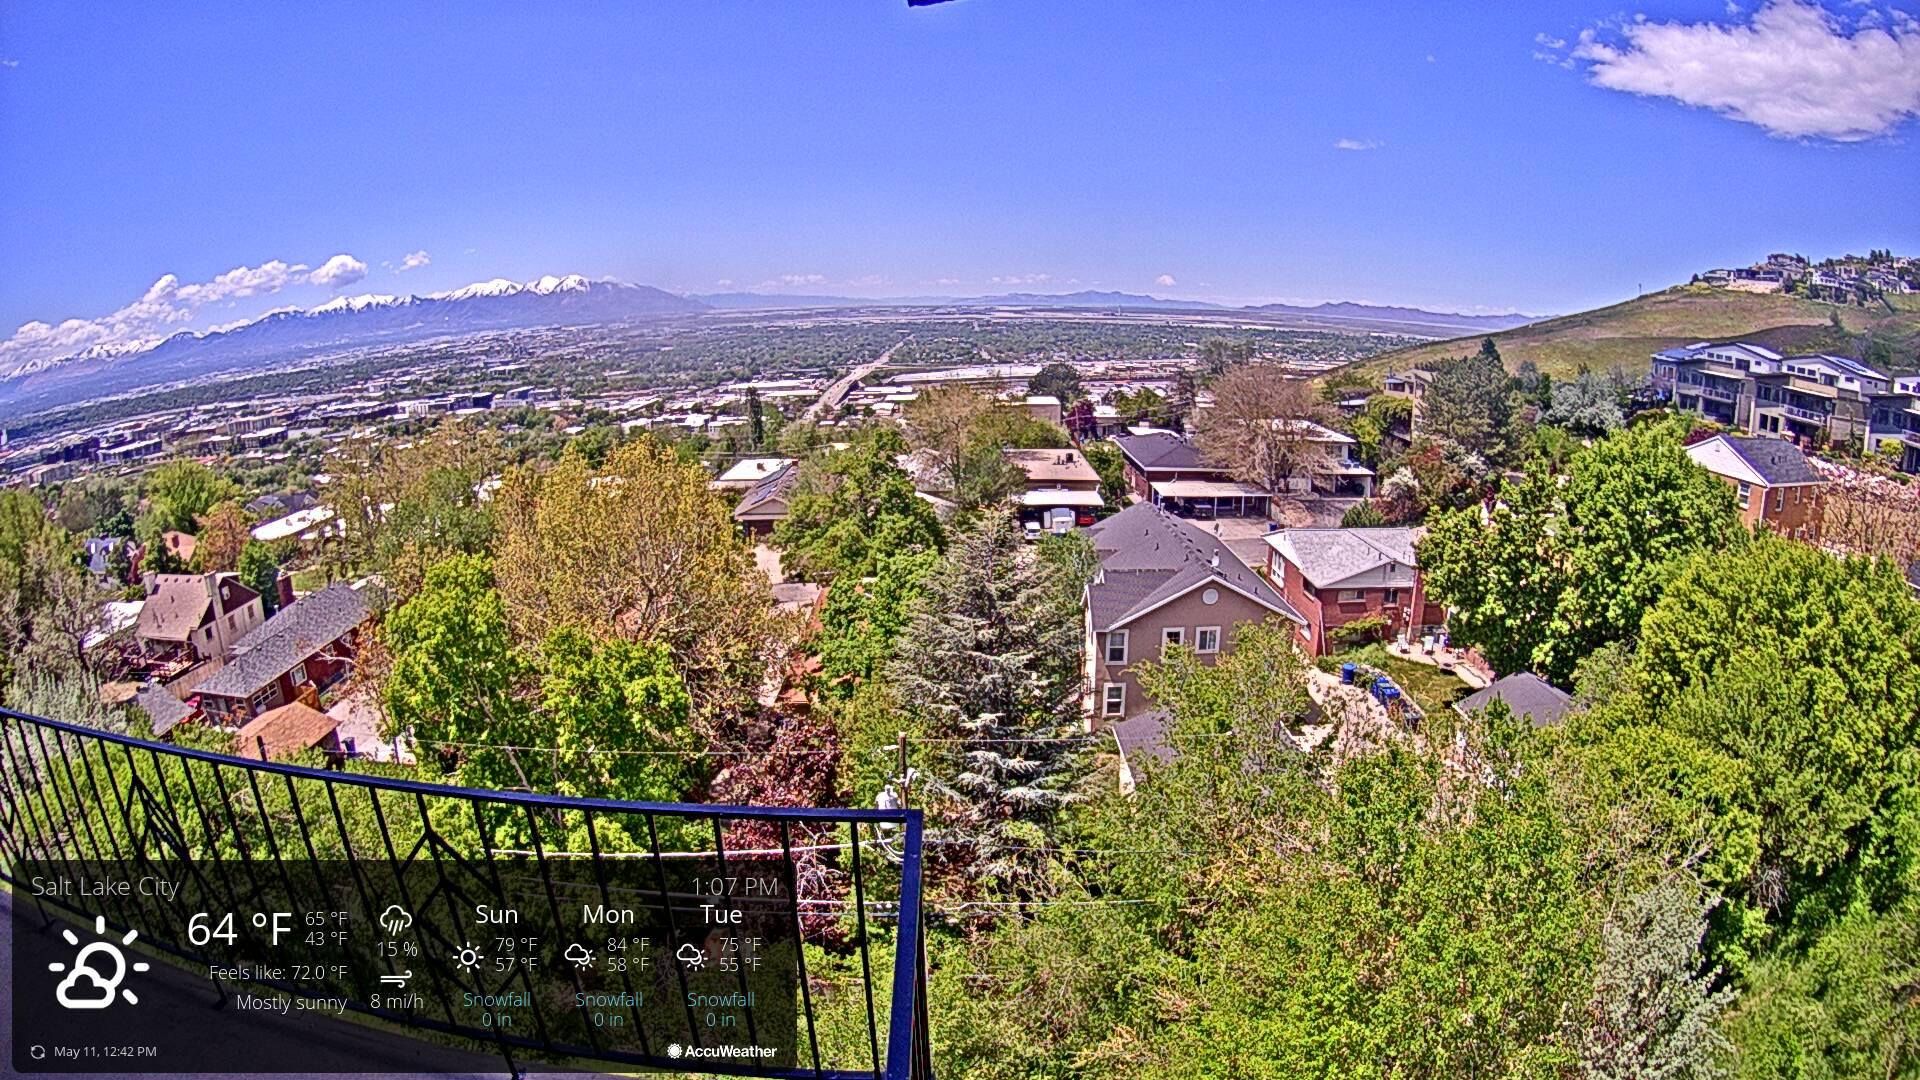 Traffic Cam Salt Lake City › West: looking southwest from above the capital Player